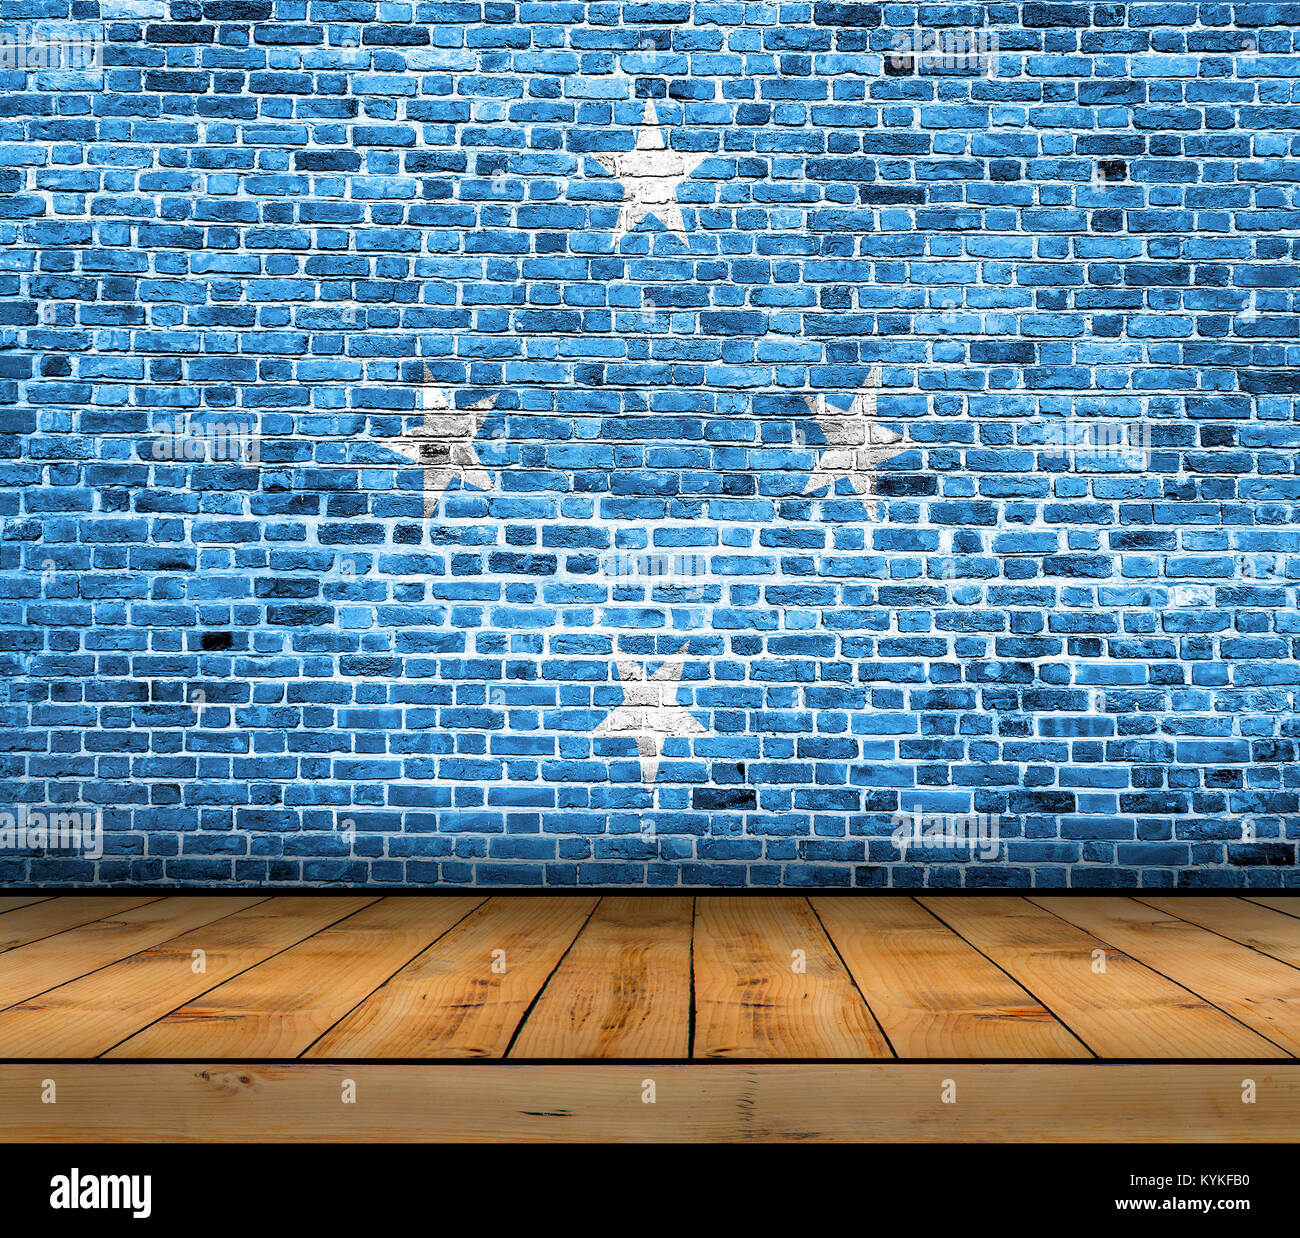 Federated States of Micronesia flag painted on brick wall with wooden floor Stock Photo